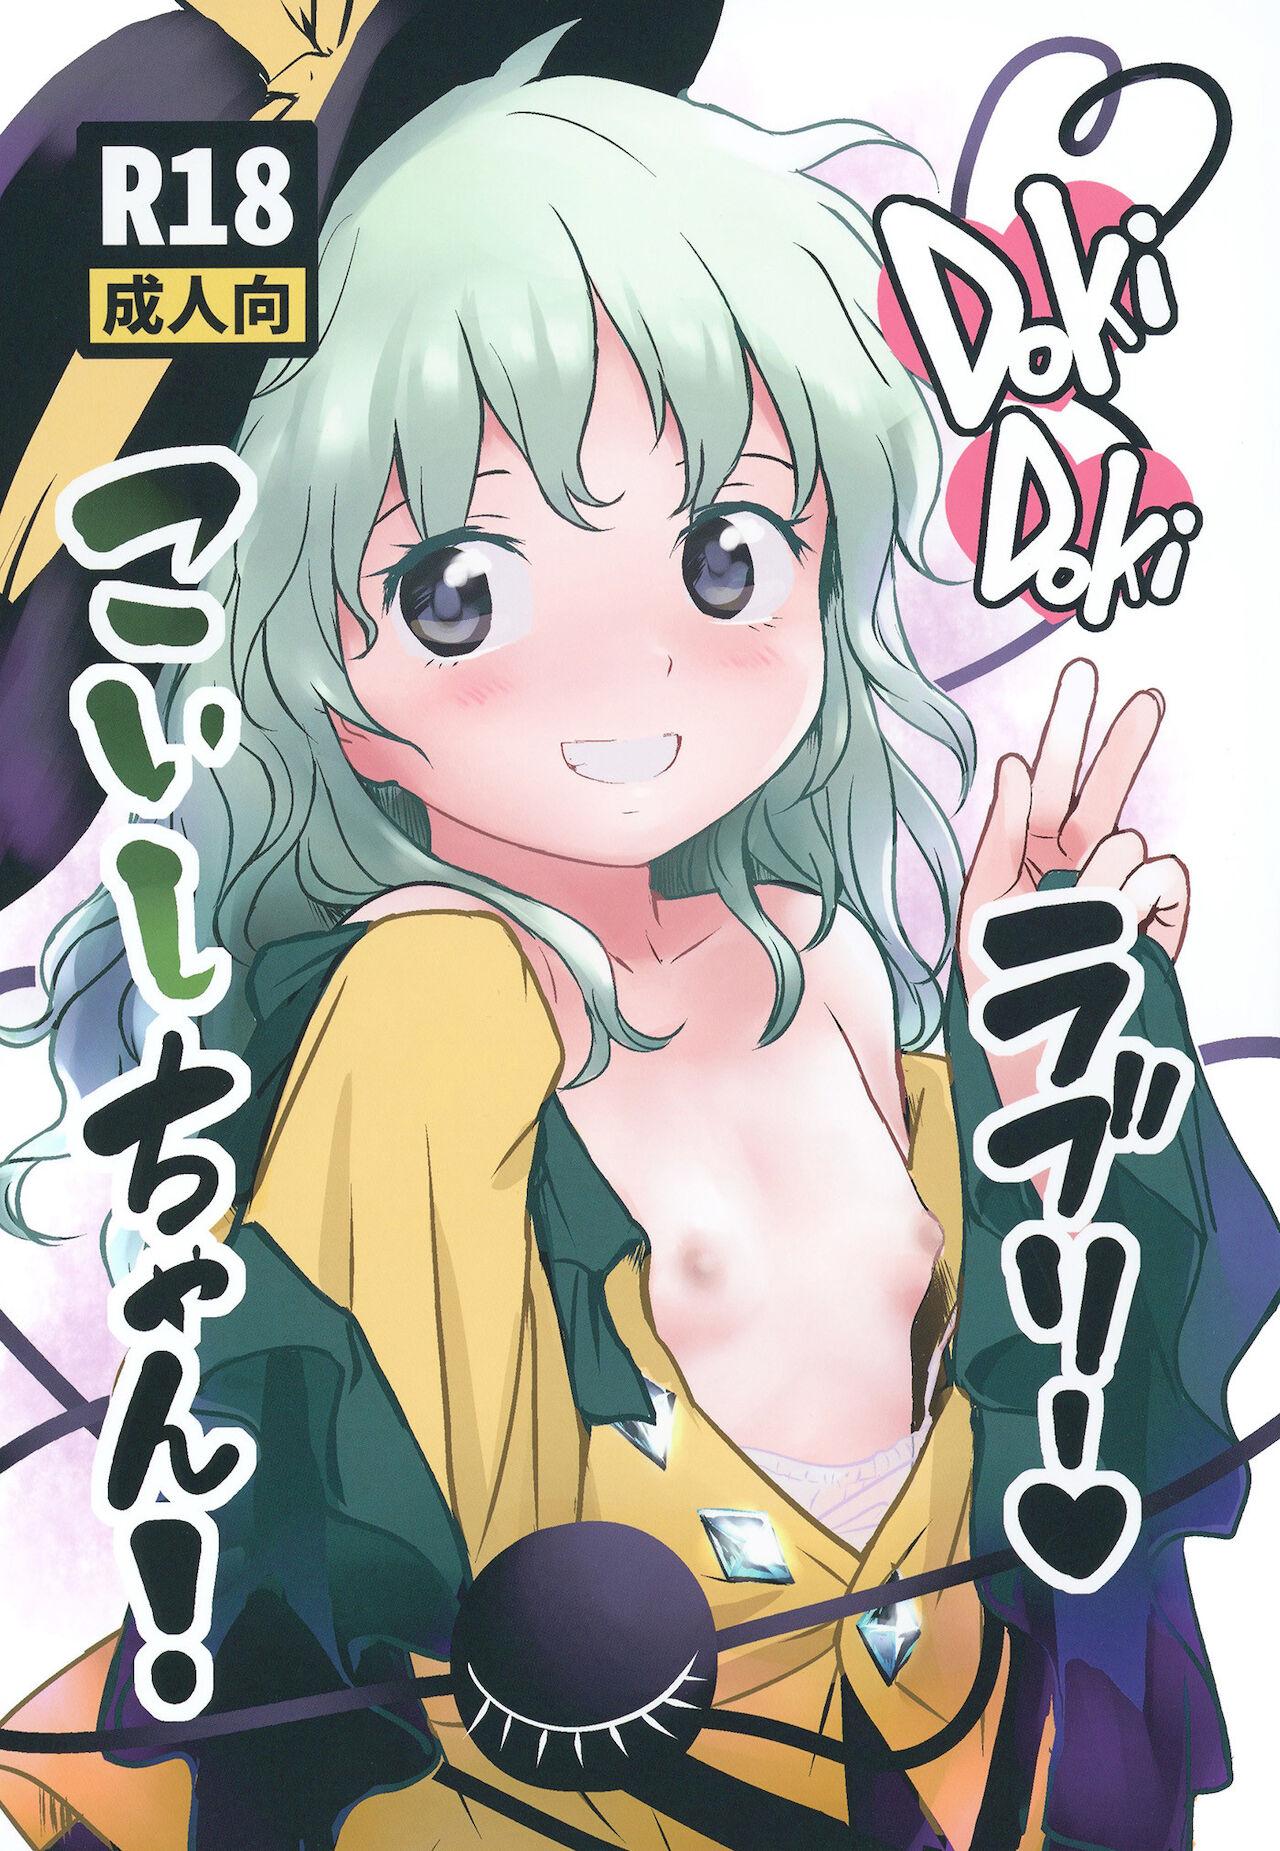 Calle DokiDoki Lovely Koishi-chan! - Touhou project Uncensored - Page 2